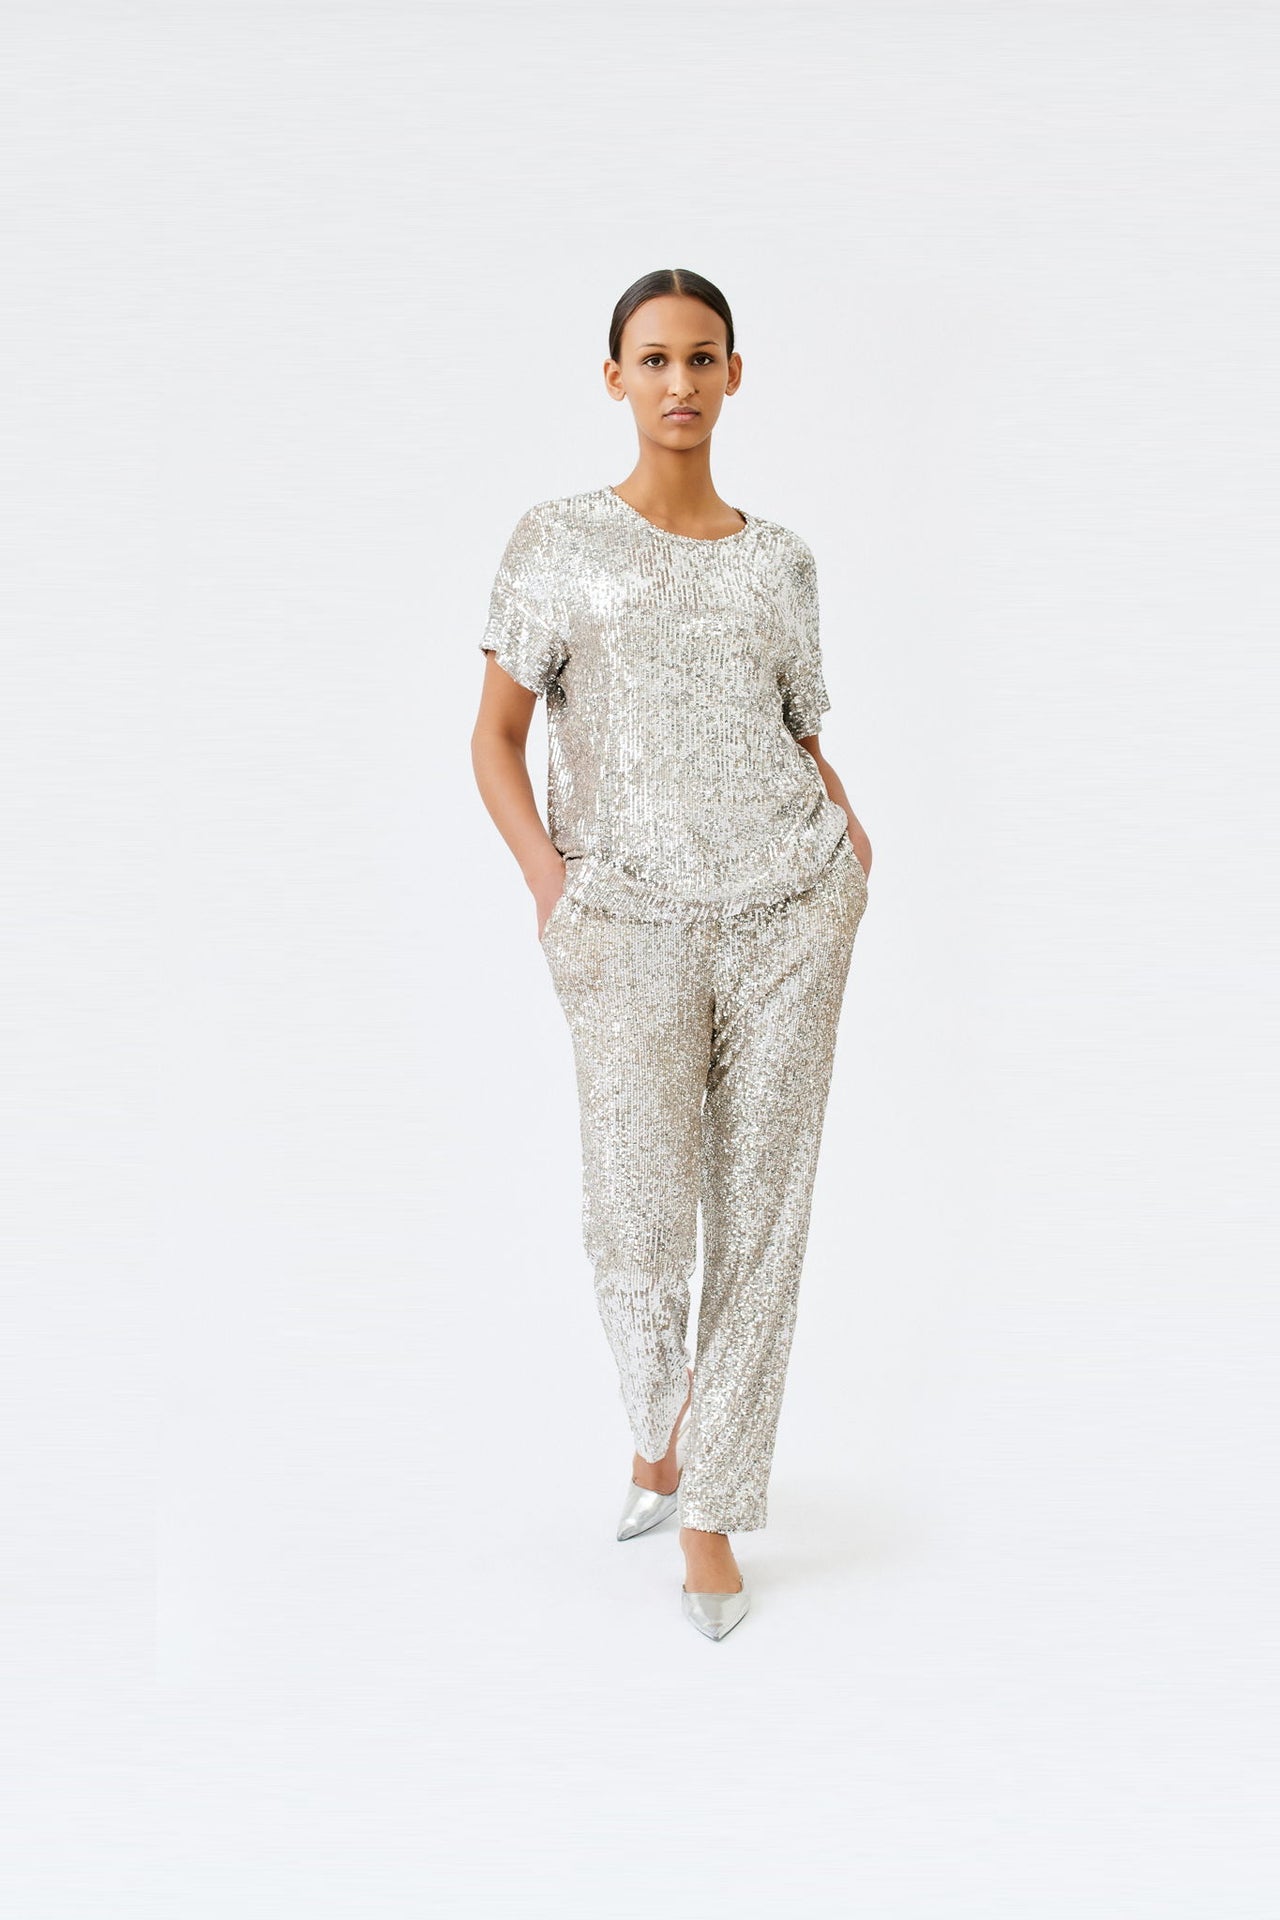 wingate collection tia silver top on female model with silver slippers dynamic